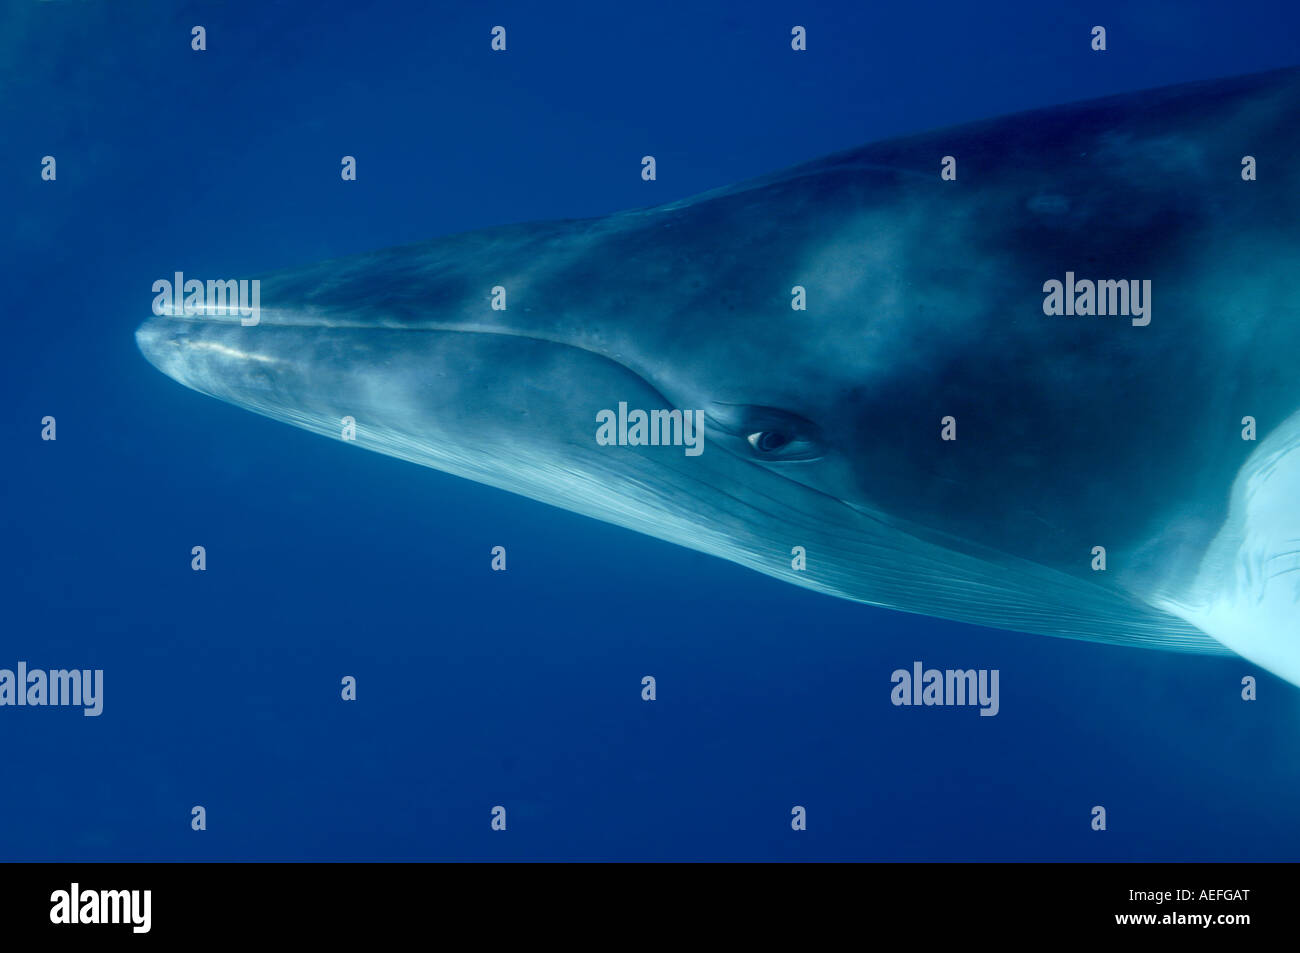 Diving with dwarf minke whale Australia Great Barrier Reef Stock Photo